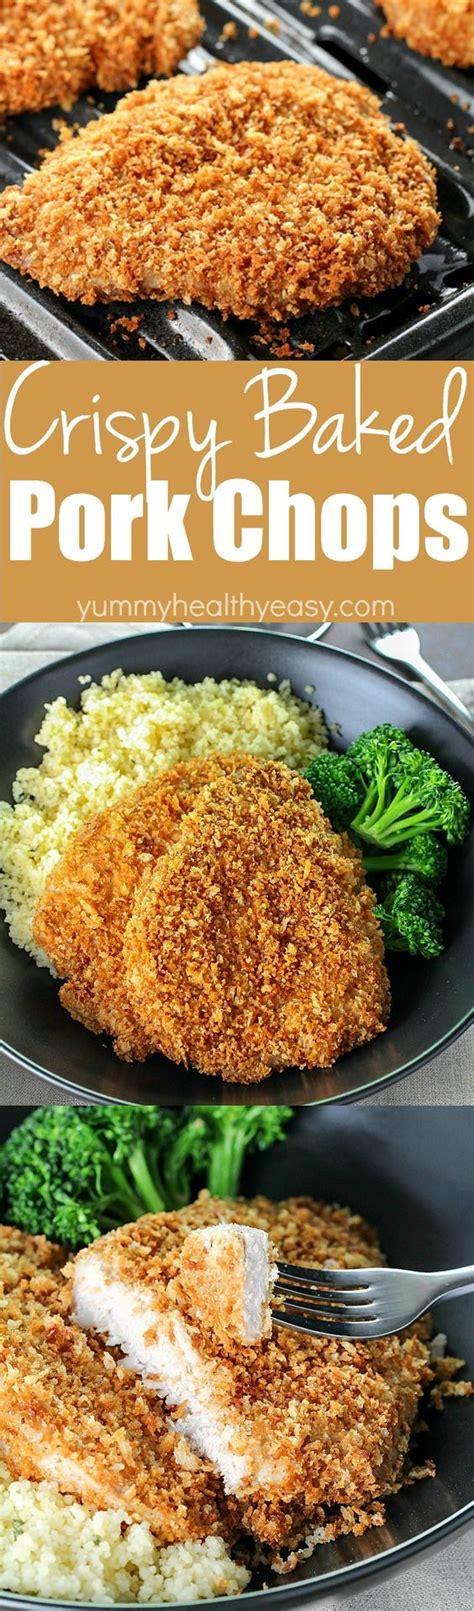 Cook 30 to 60 seconds, beating frequently, until thickened. These Crispy Baked Breaded Pork Chops are crunchy on the outside and tender on the inside! Only ...